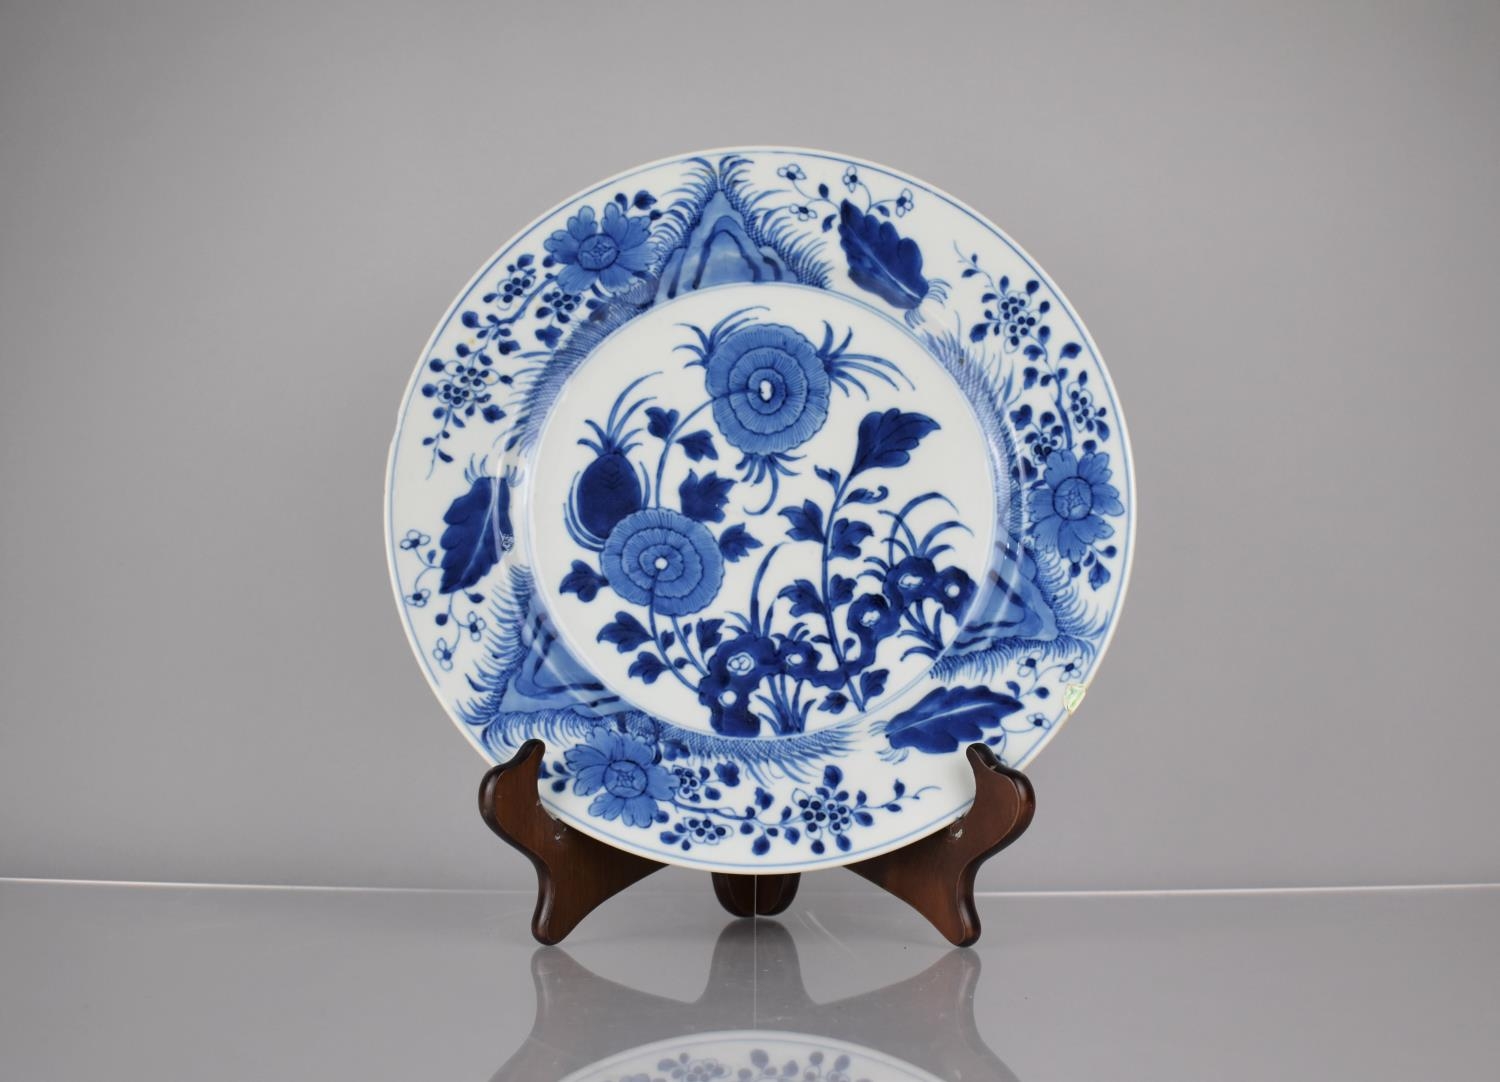 A 19th Century Chinese Porcelain Blue and White Plate Decorated in a Floral Motif, the back with